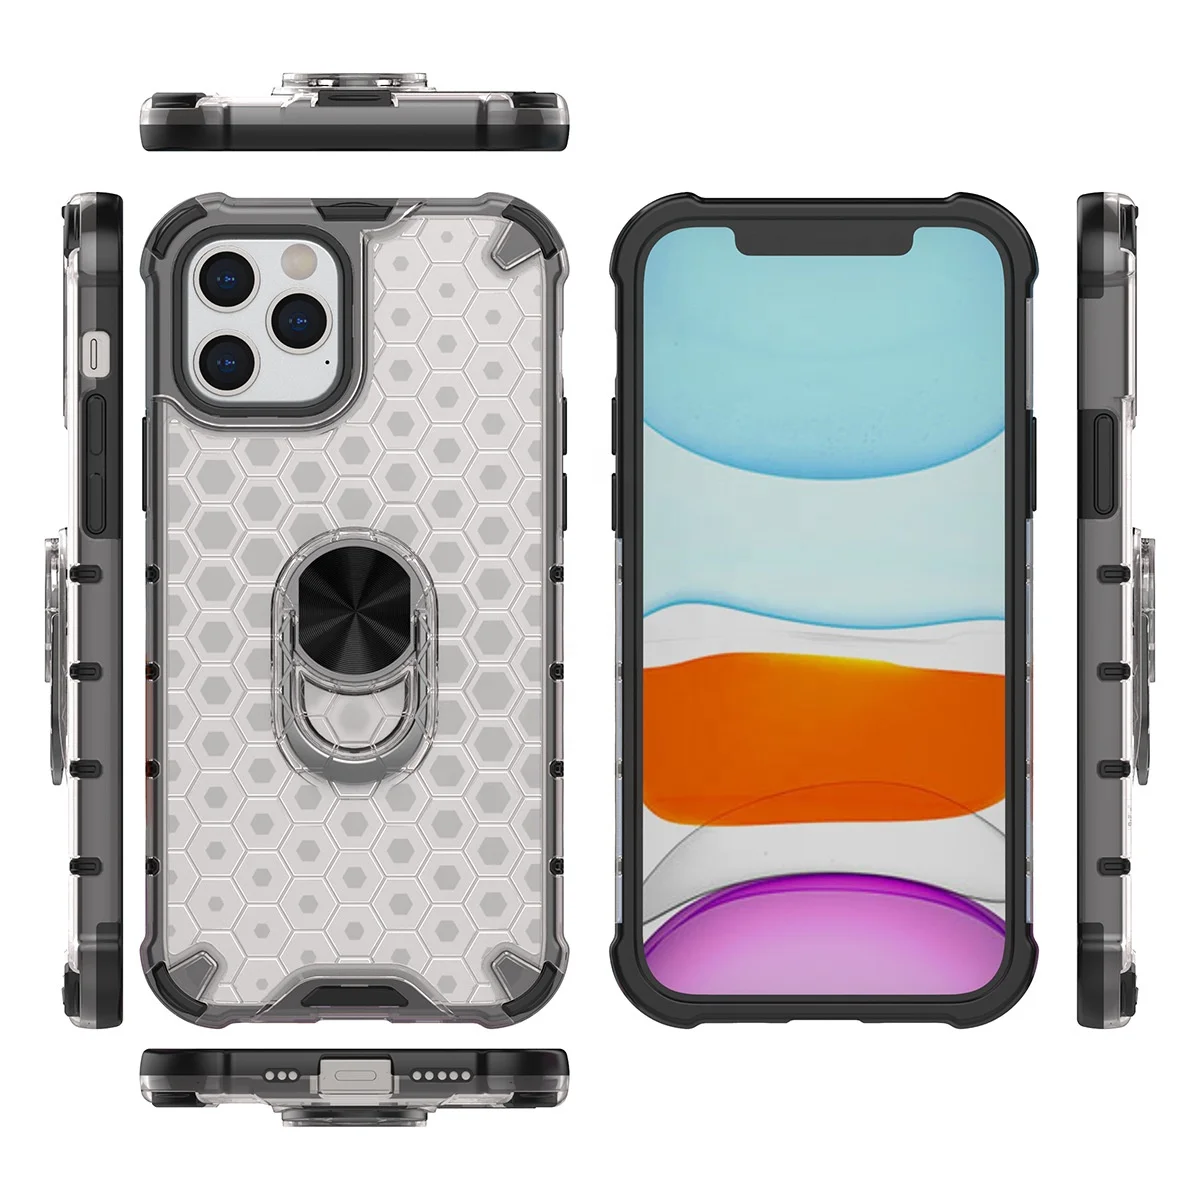 

Honeycomb Clear Shockproof Armor Case For iPhone 12 11 Pro Max 12 Mini XS Max XR XS X 7 8 6S Plus SE 2020 With Metal Ring Holder